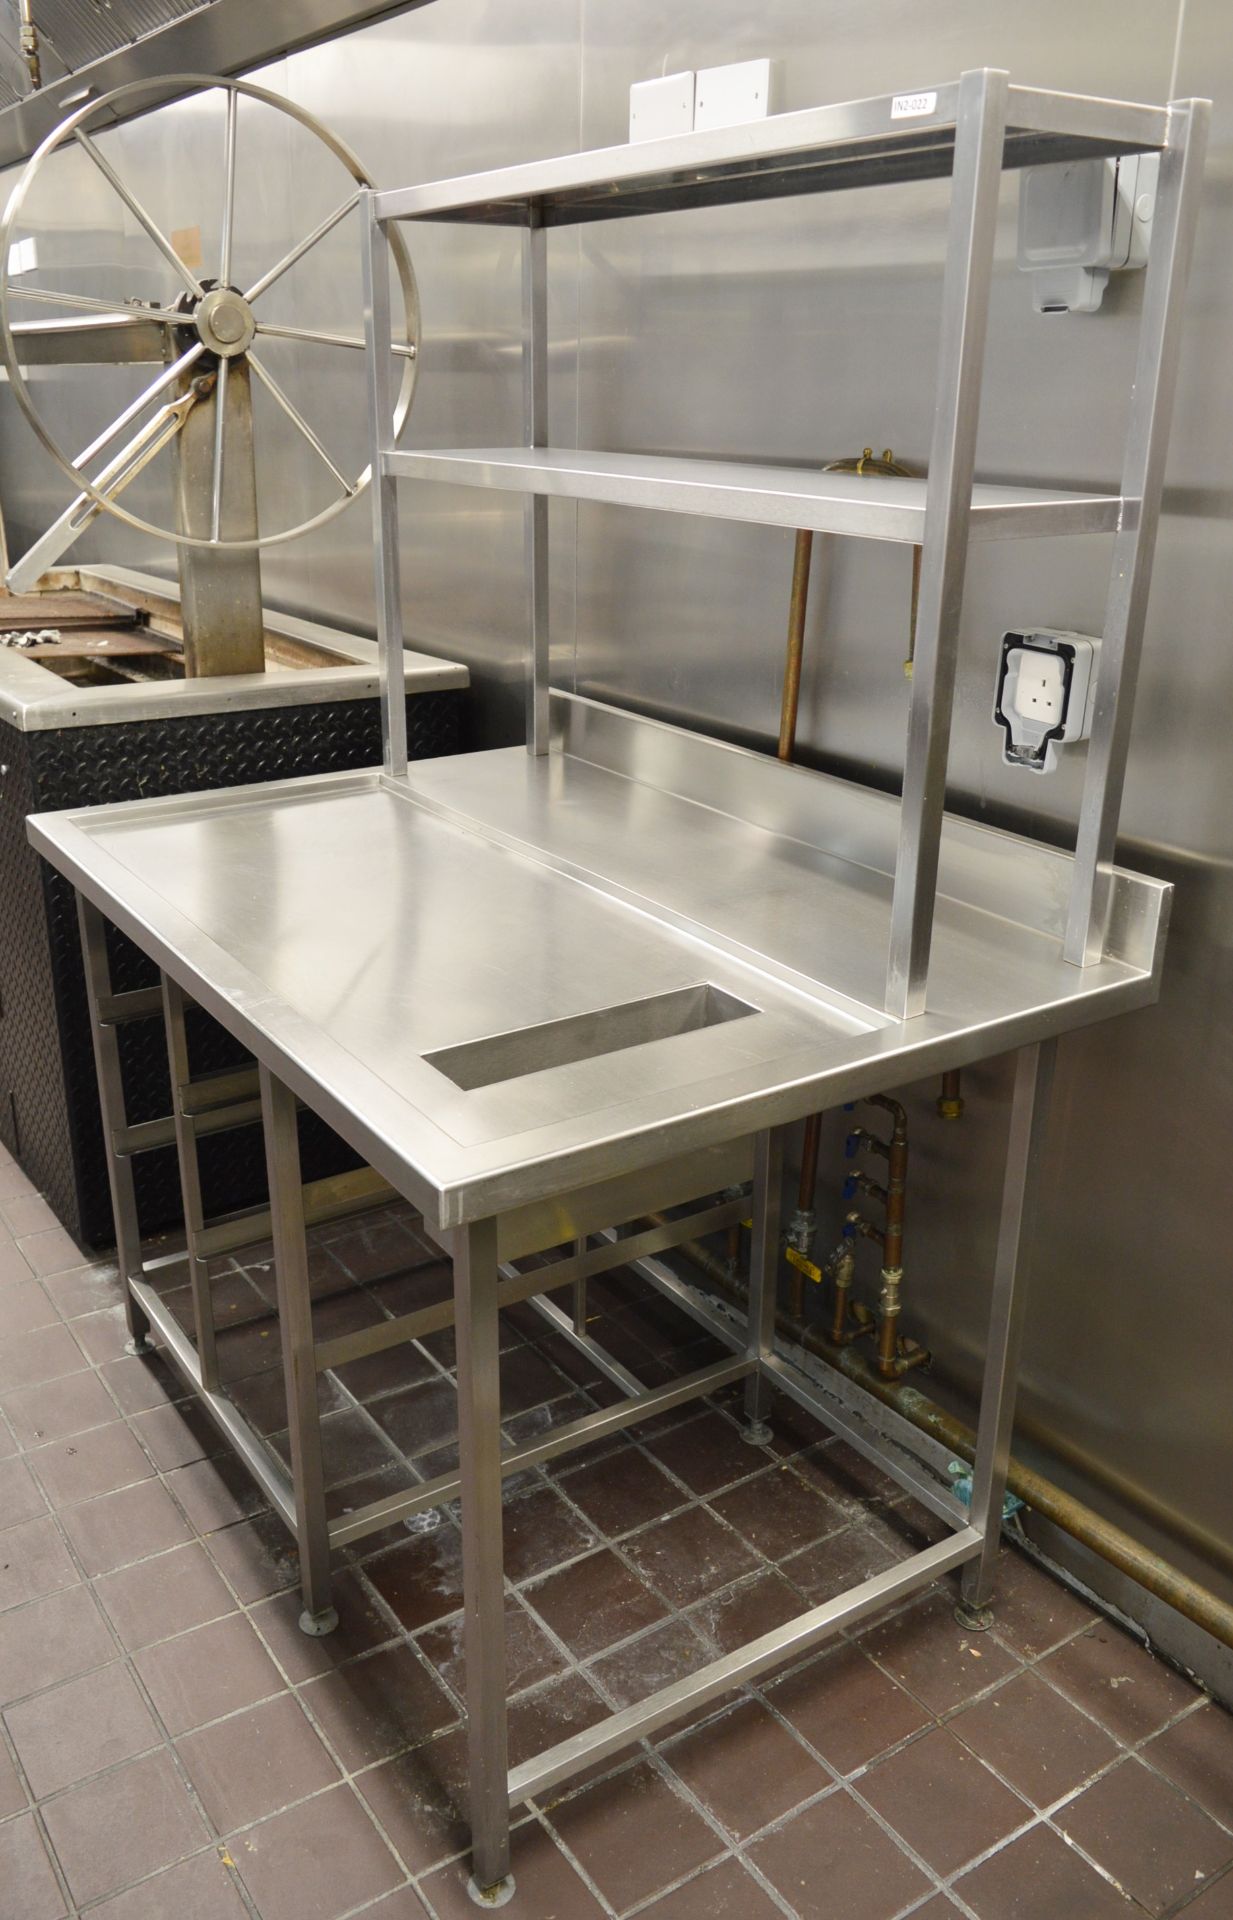 1 x Stainless Steel Prep Bench With Undercounter Shelves, Bin Chute and Overhead Shelves - H87/171 x